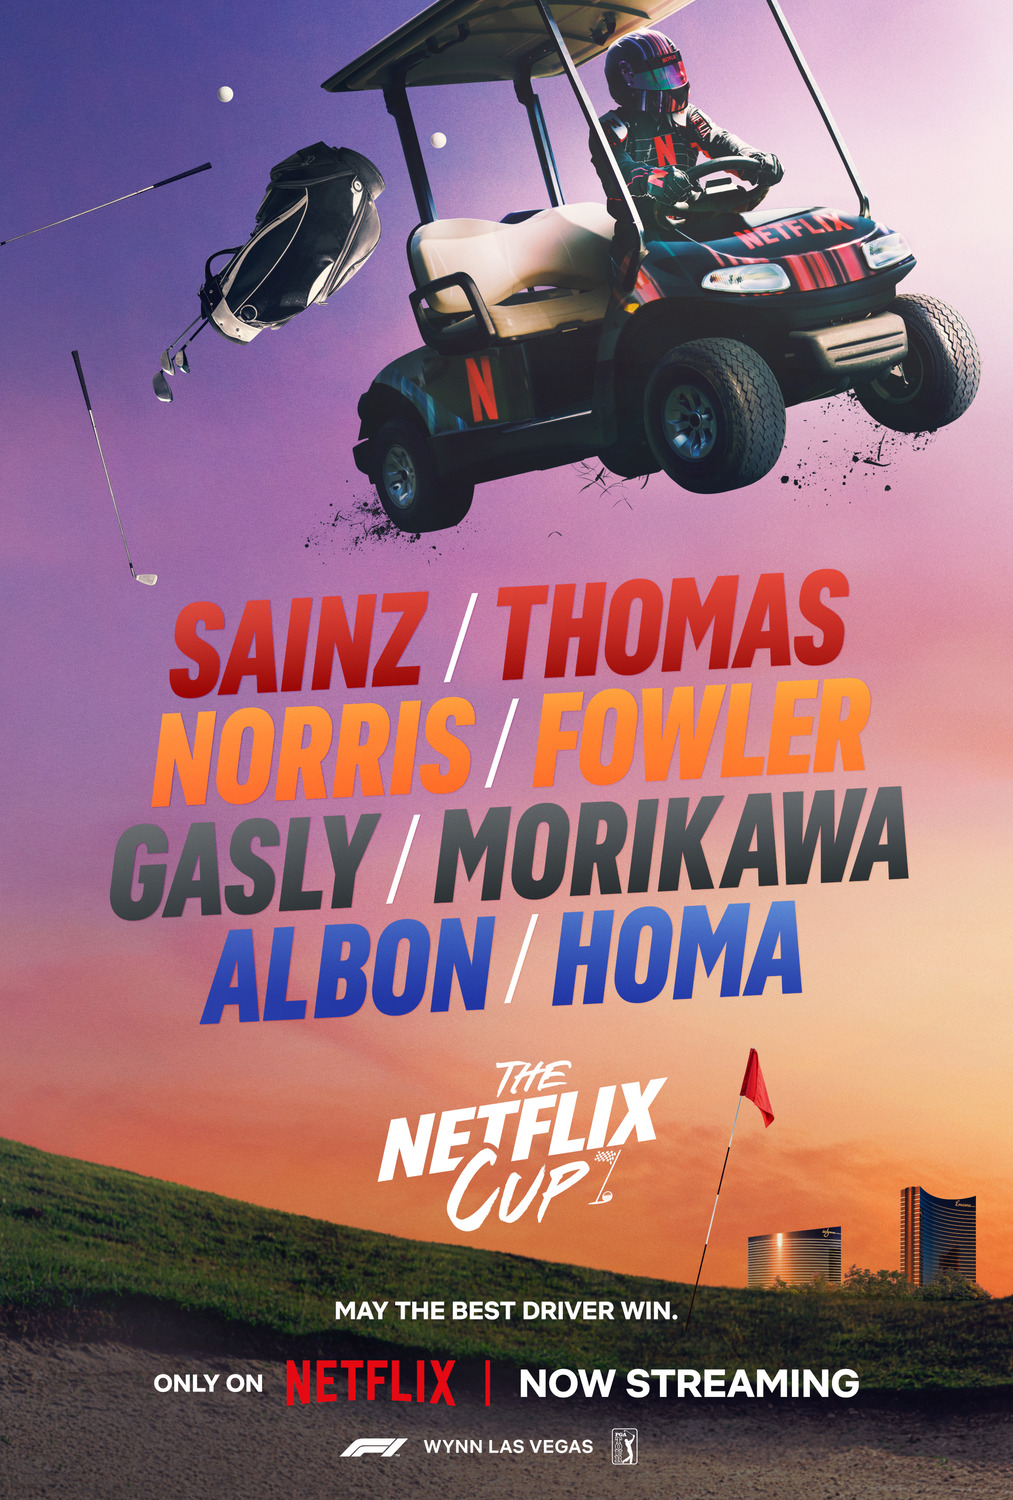 Extra Large TV Poster Image for The Netflix Cup (#3 of 3)